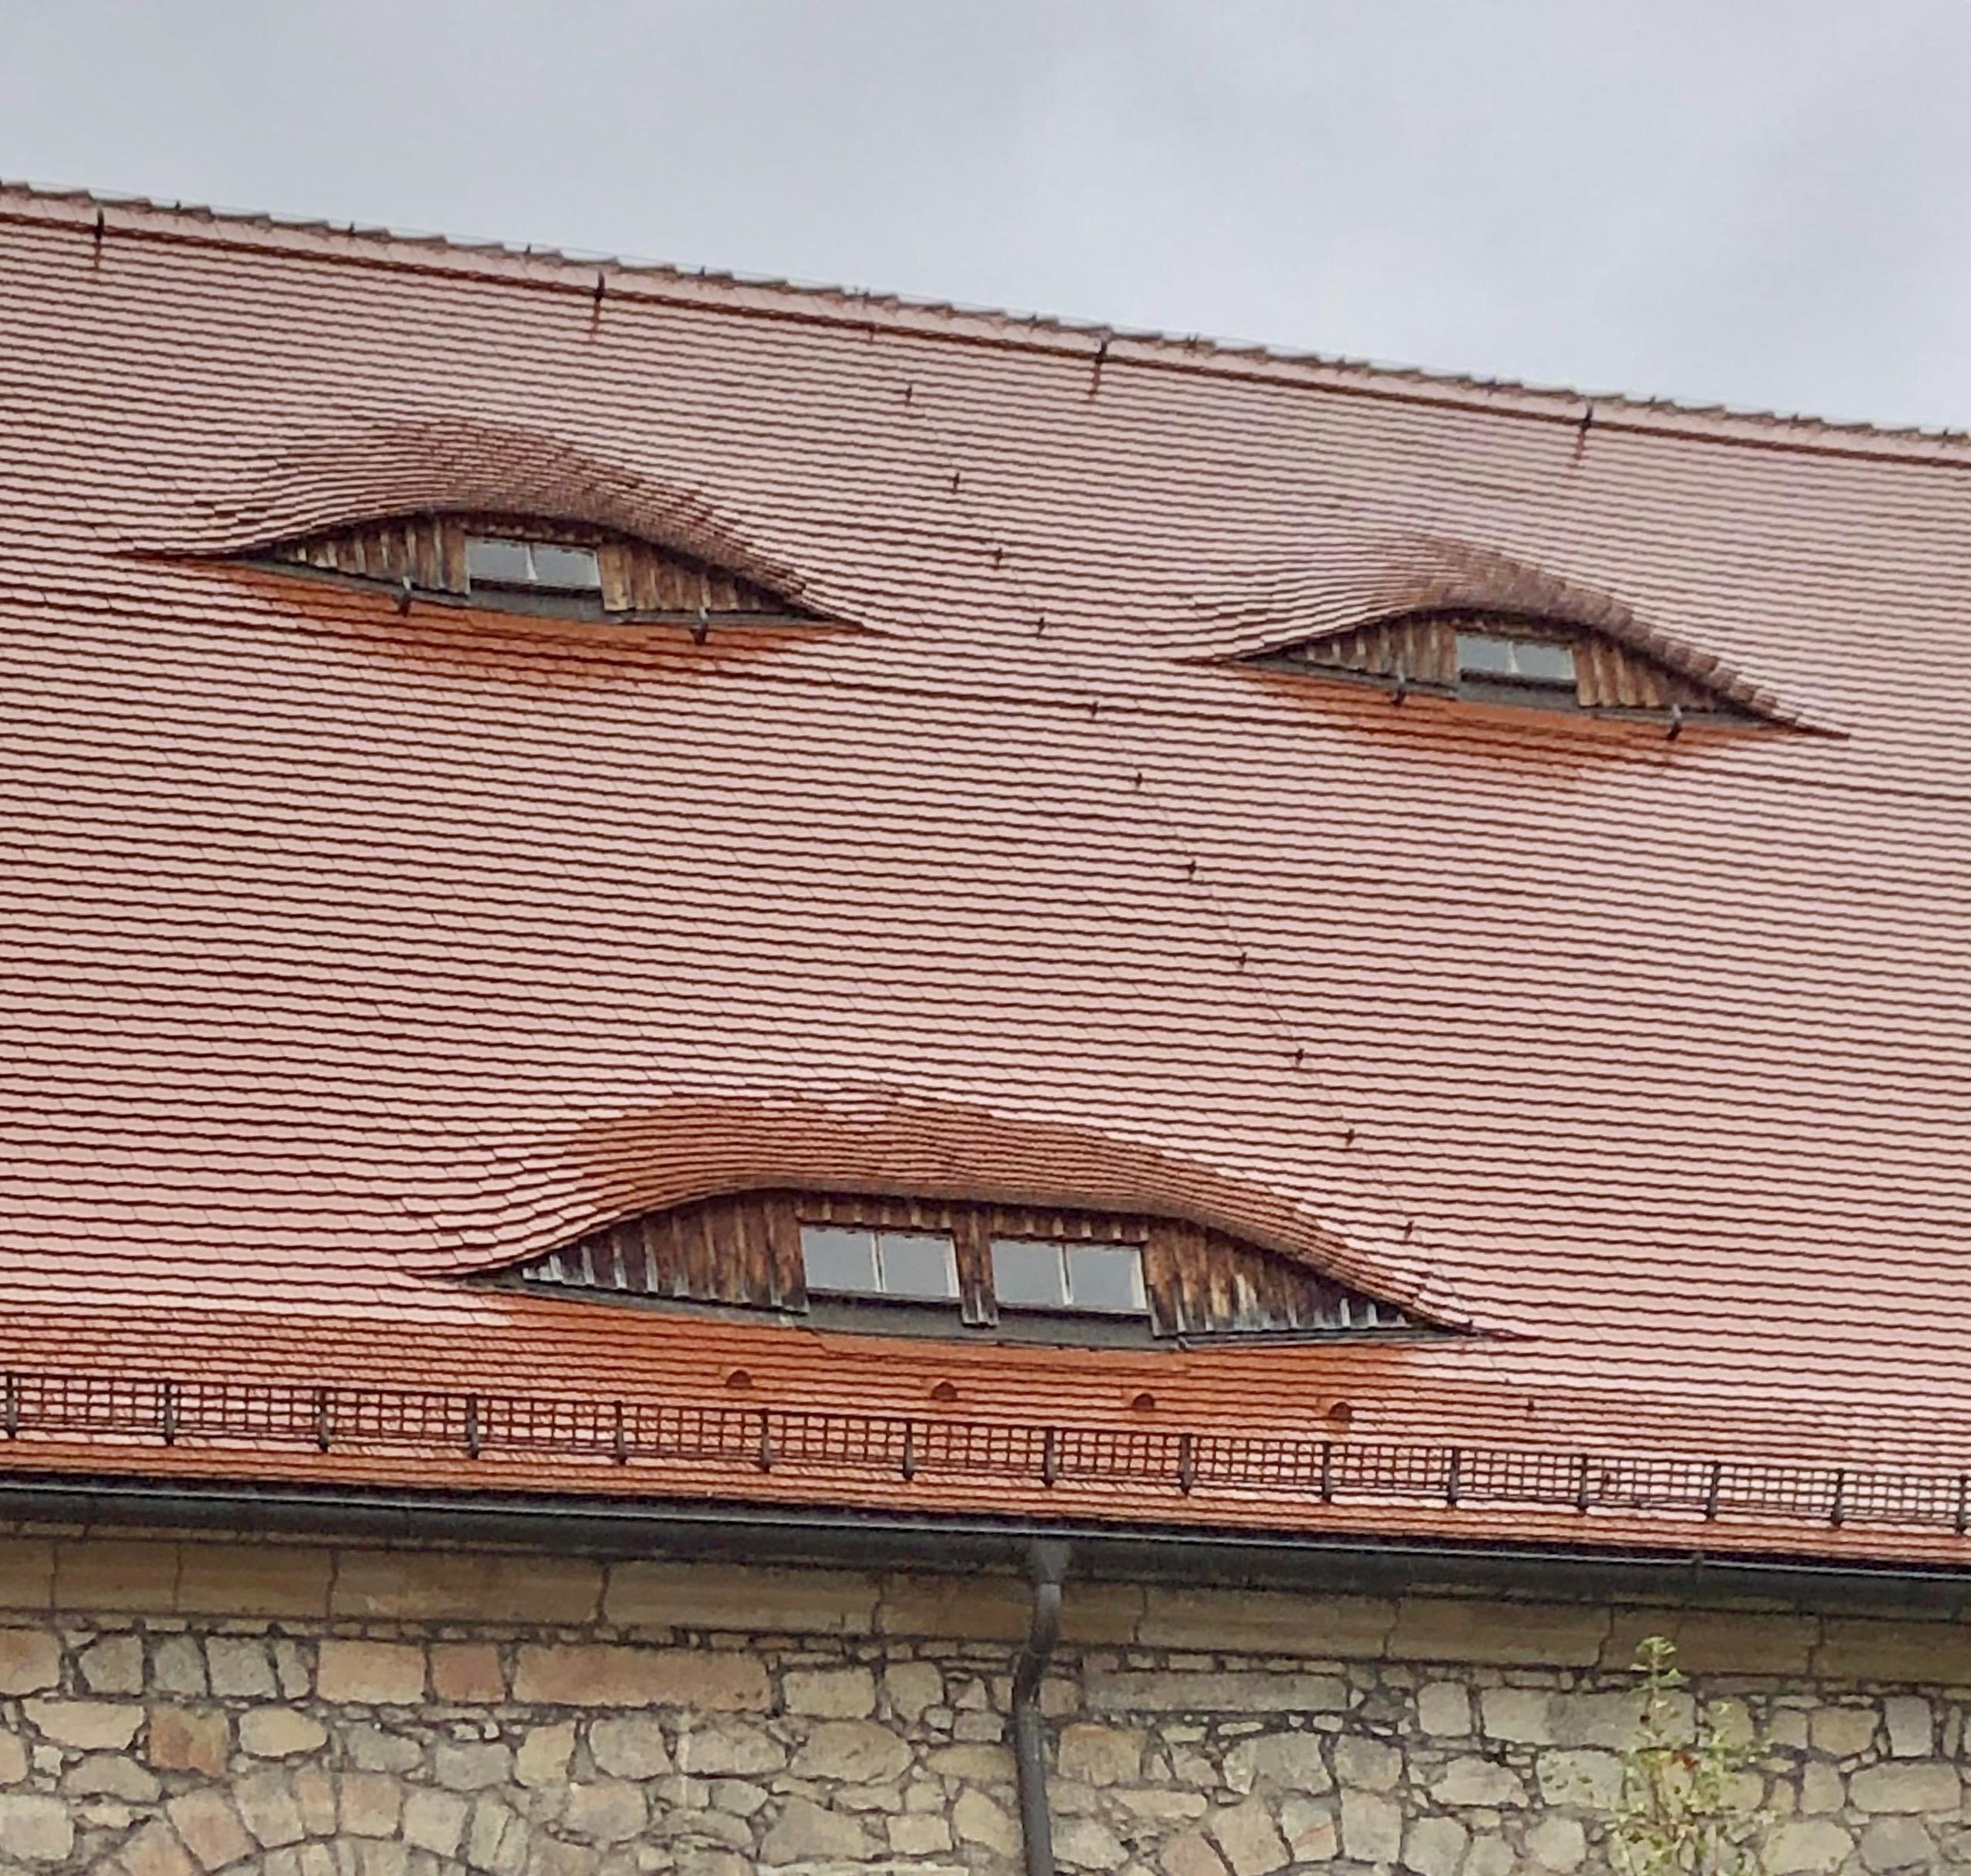 A face on a roof